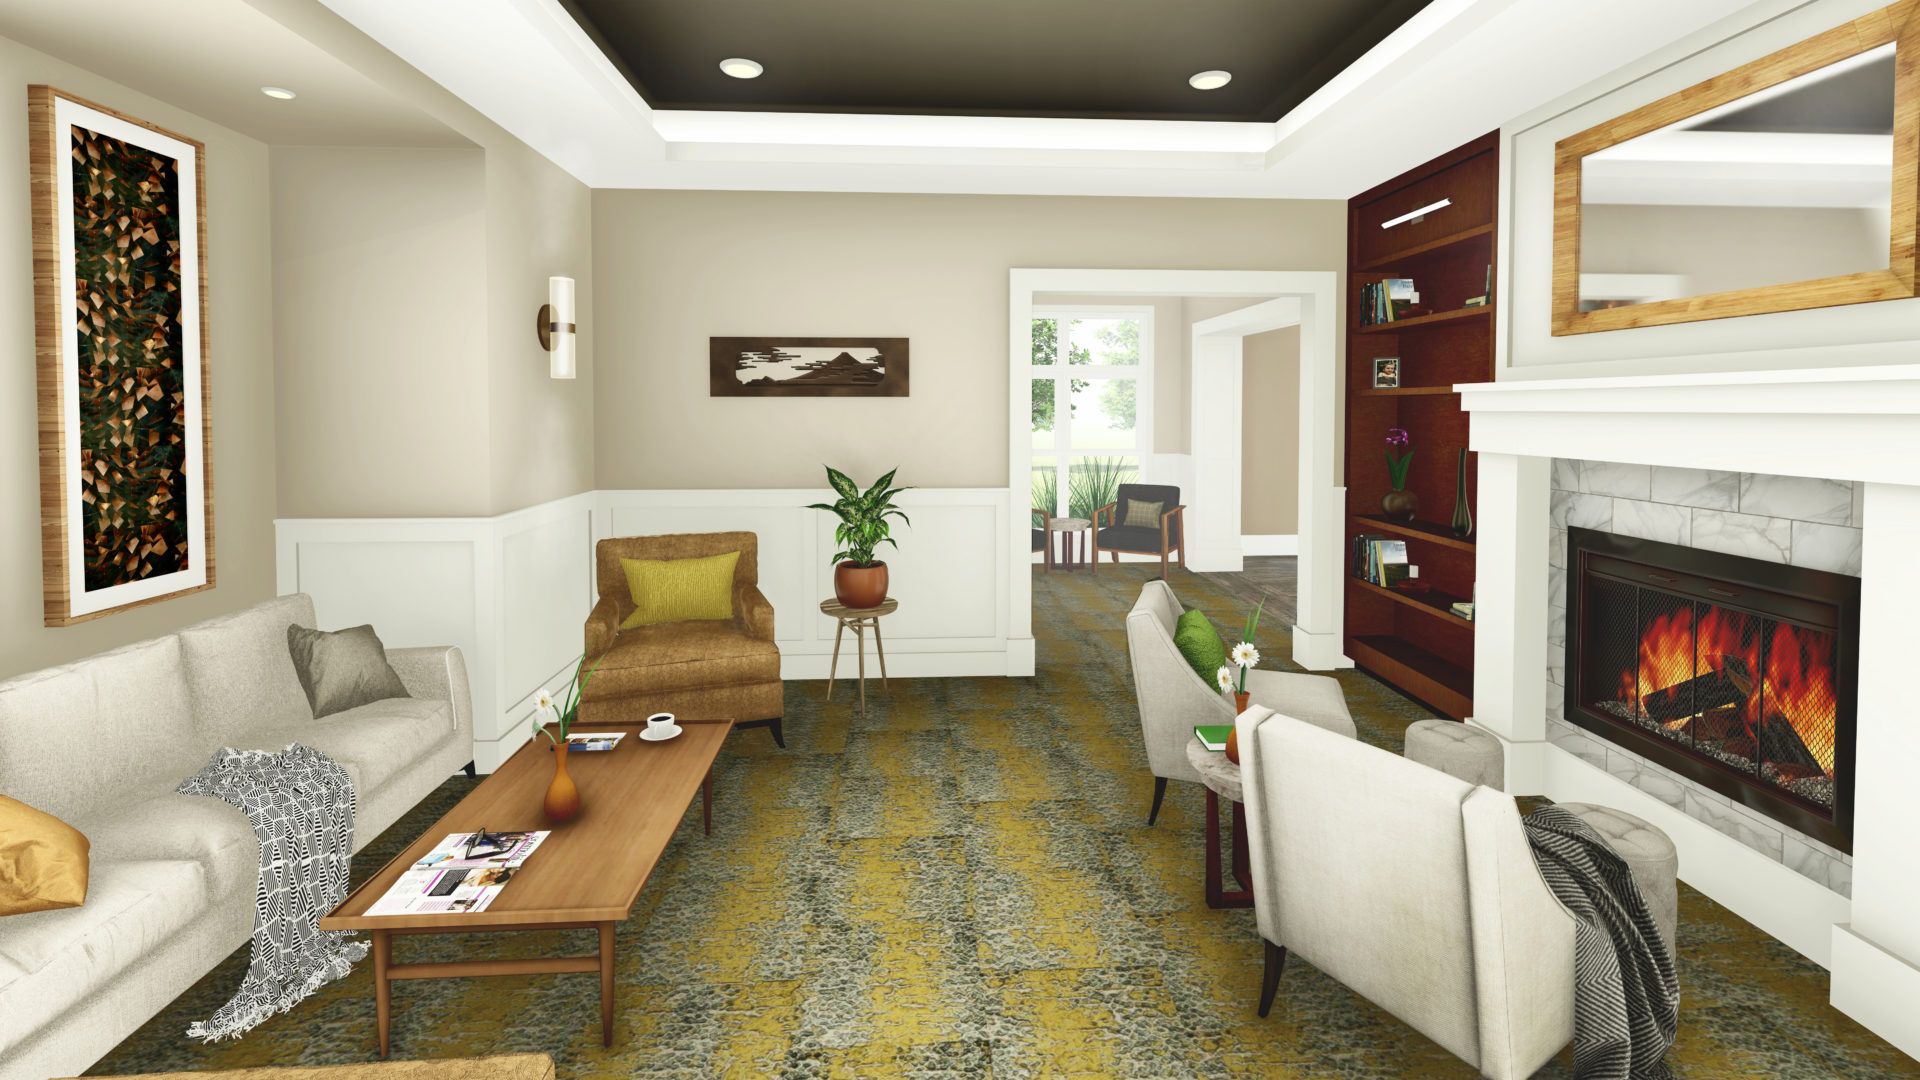 Interior view of Tiffany Springs Senior Living room with modern decor, furniture, and fireplace.